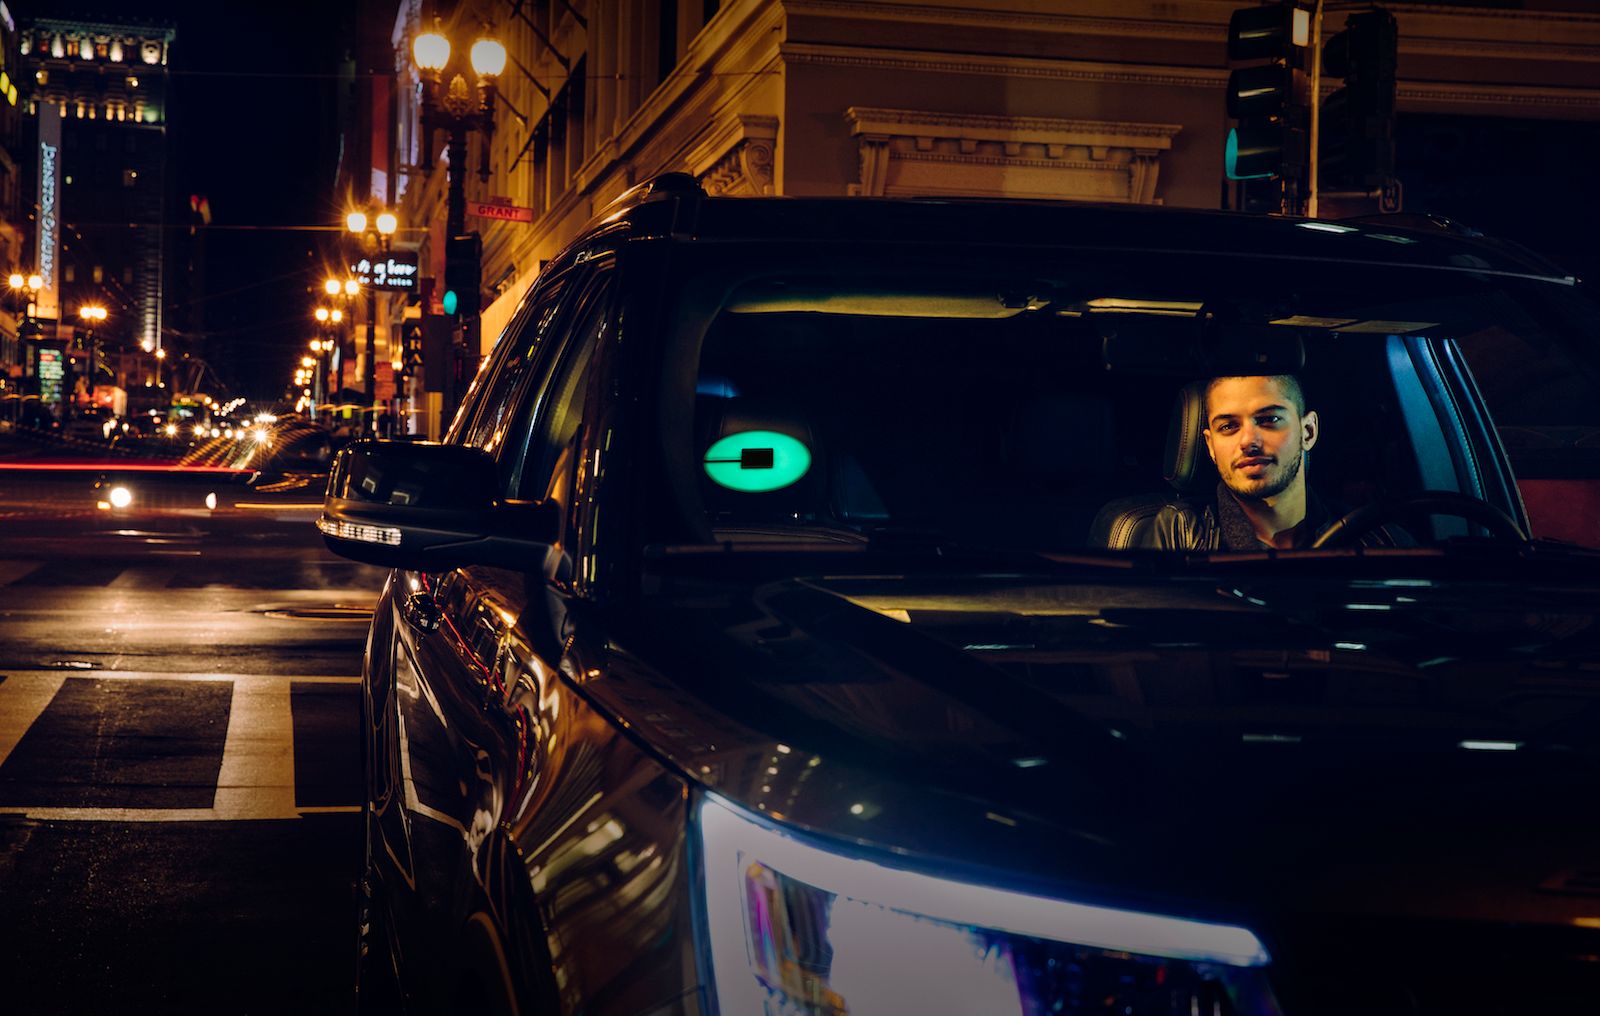 uber beacon makes it easier to identify your cab at night image 1